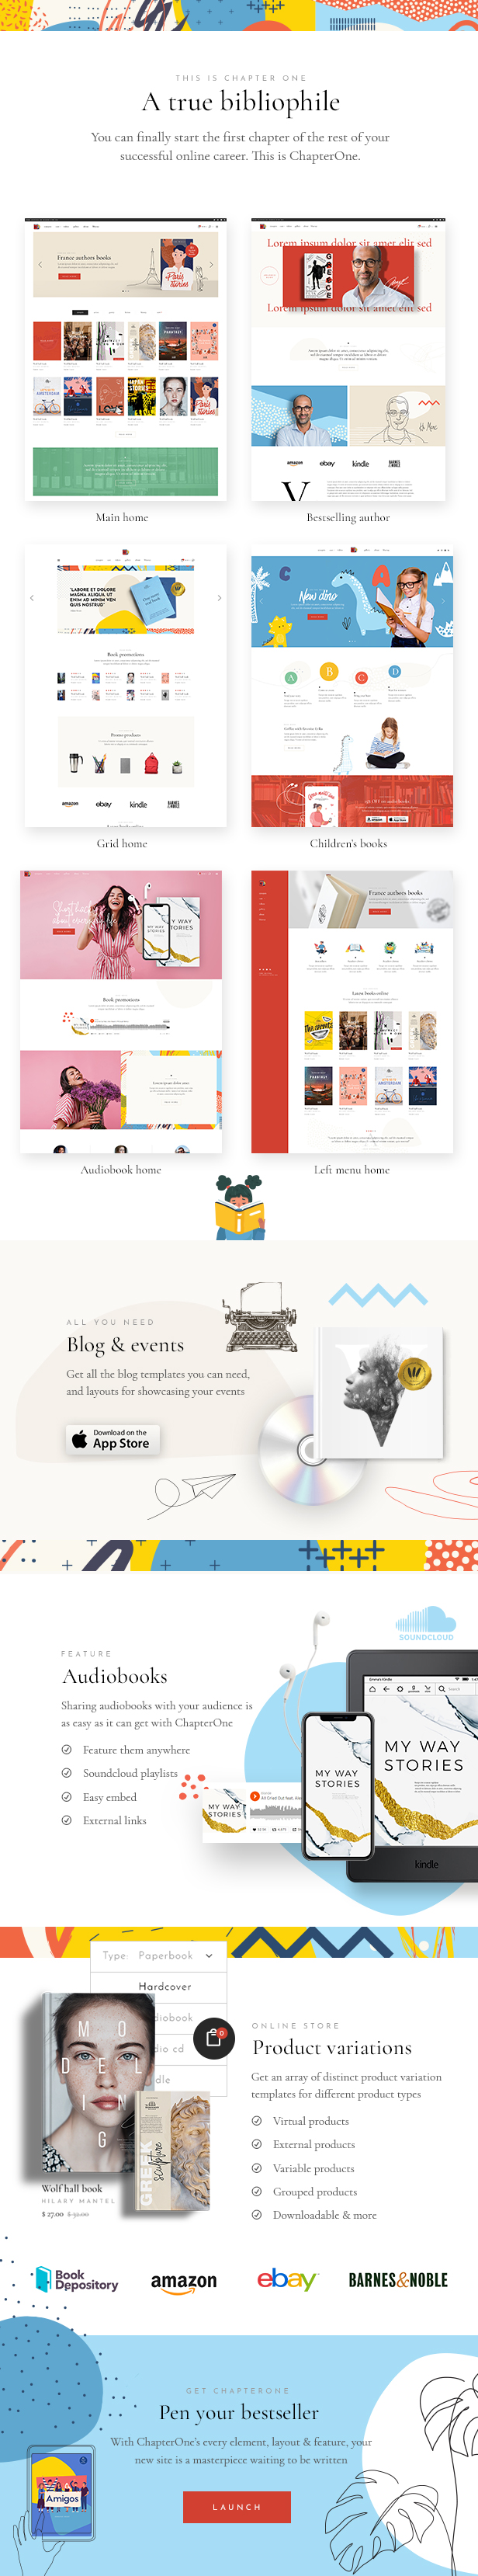 ChapterOne - Bookstore and Publisher Theme - 2